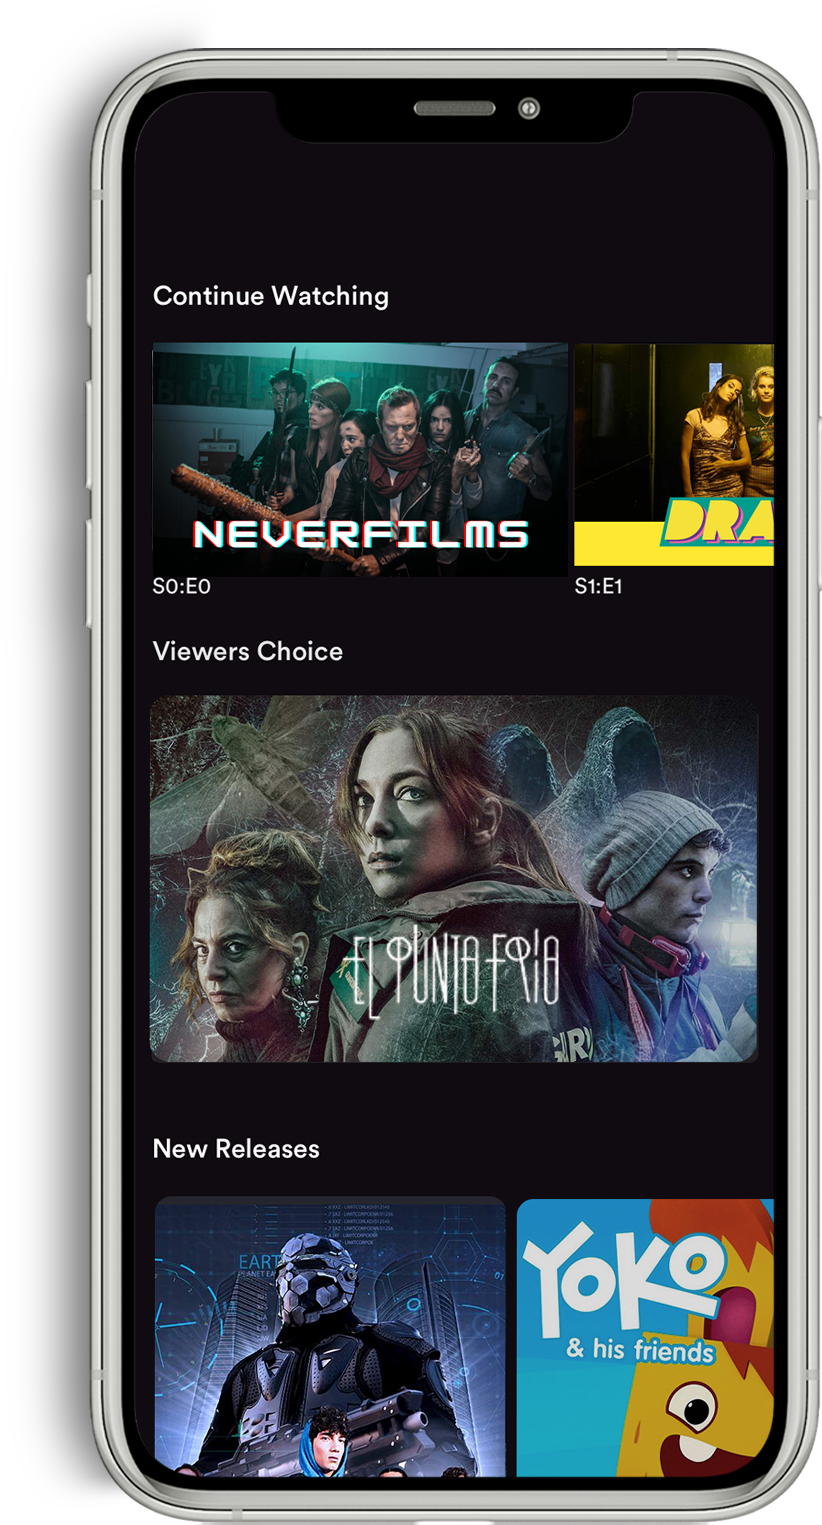 where can i watch tv series on mobile